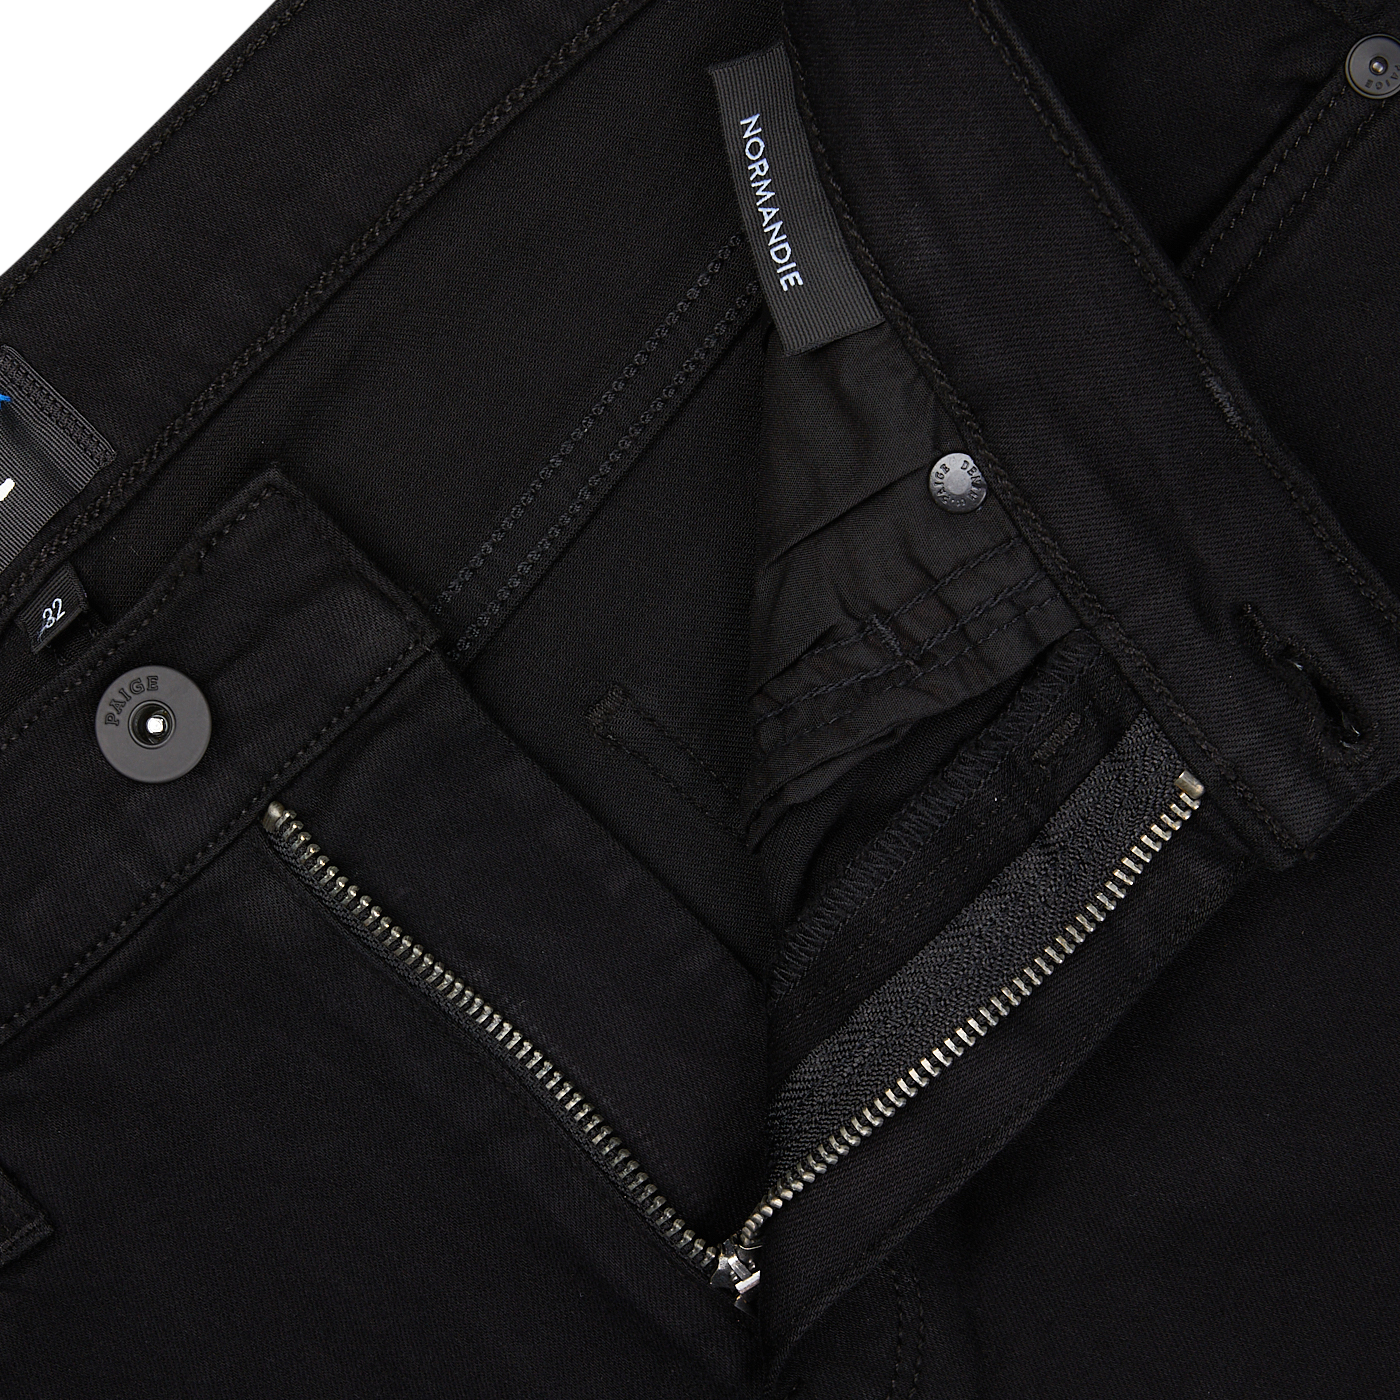 Black jacket with zipper and buttons, featuring a visible Paige jeans brand label.